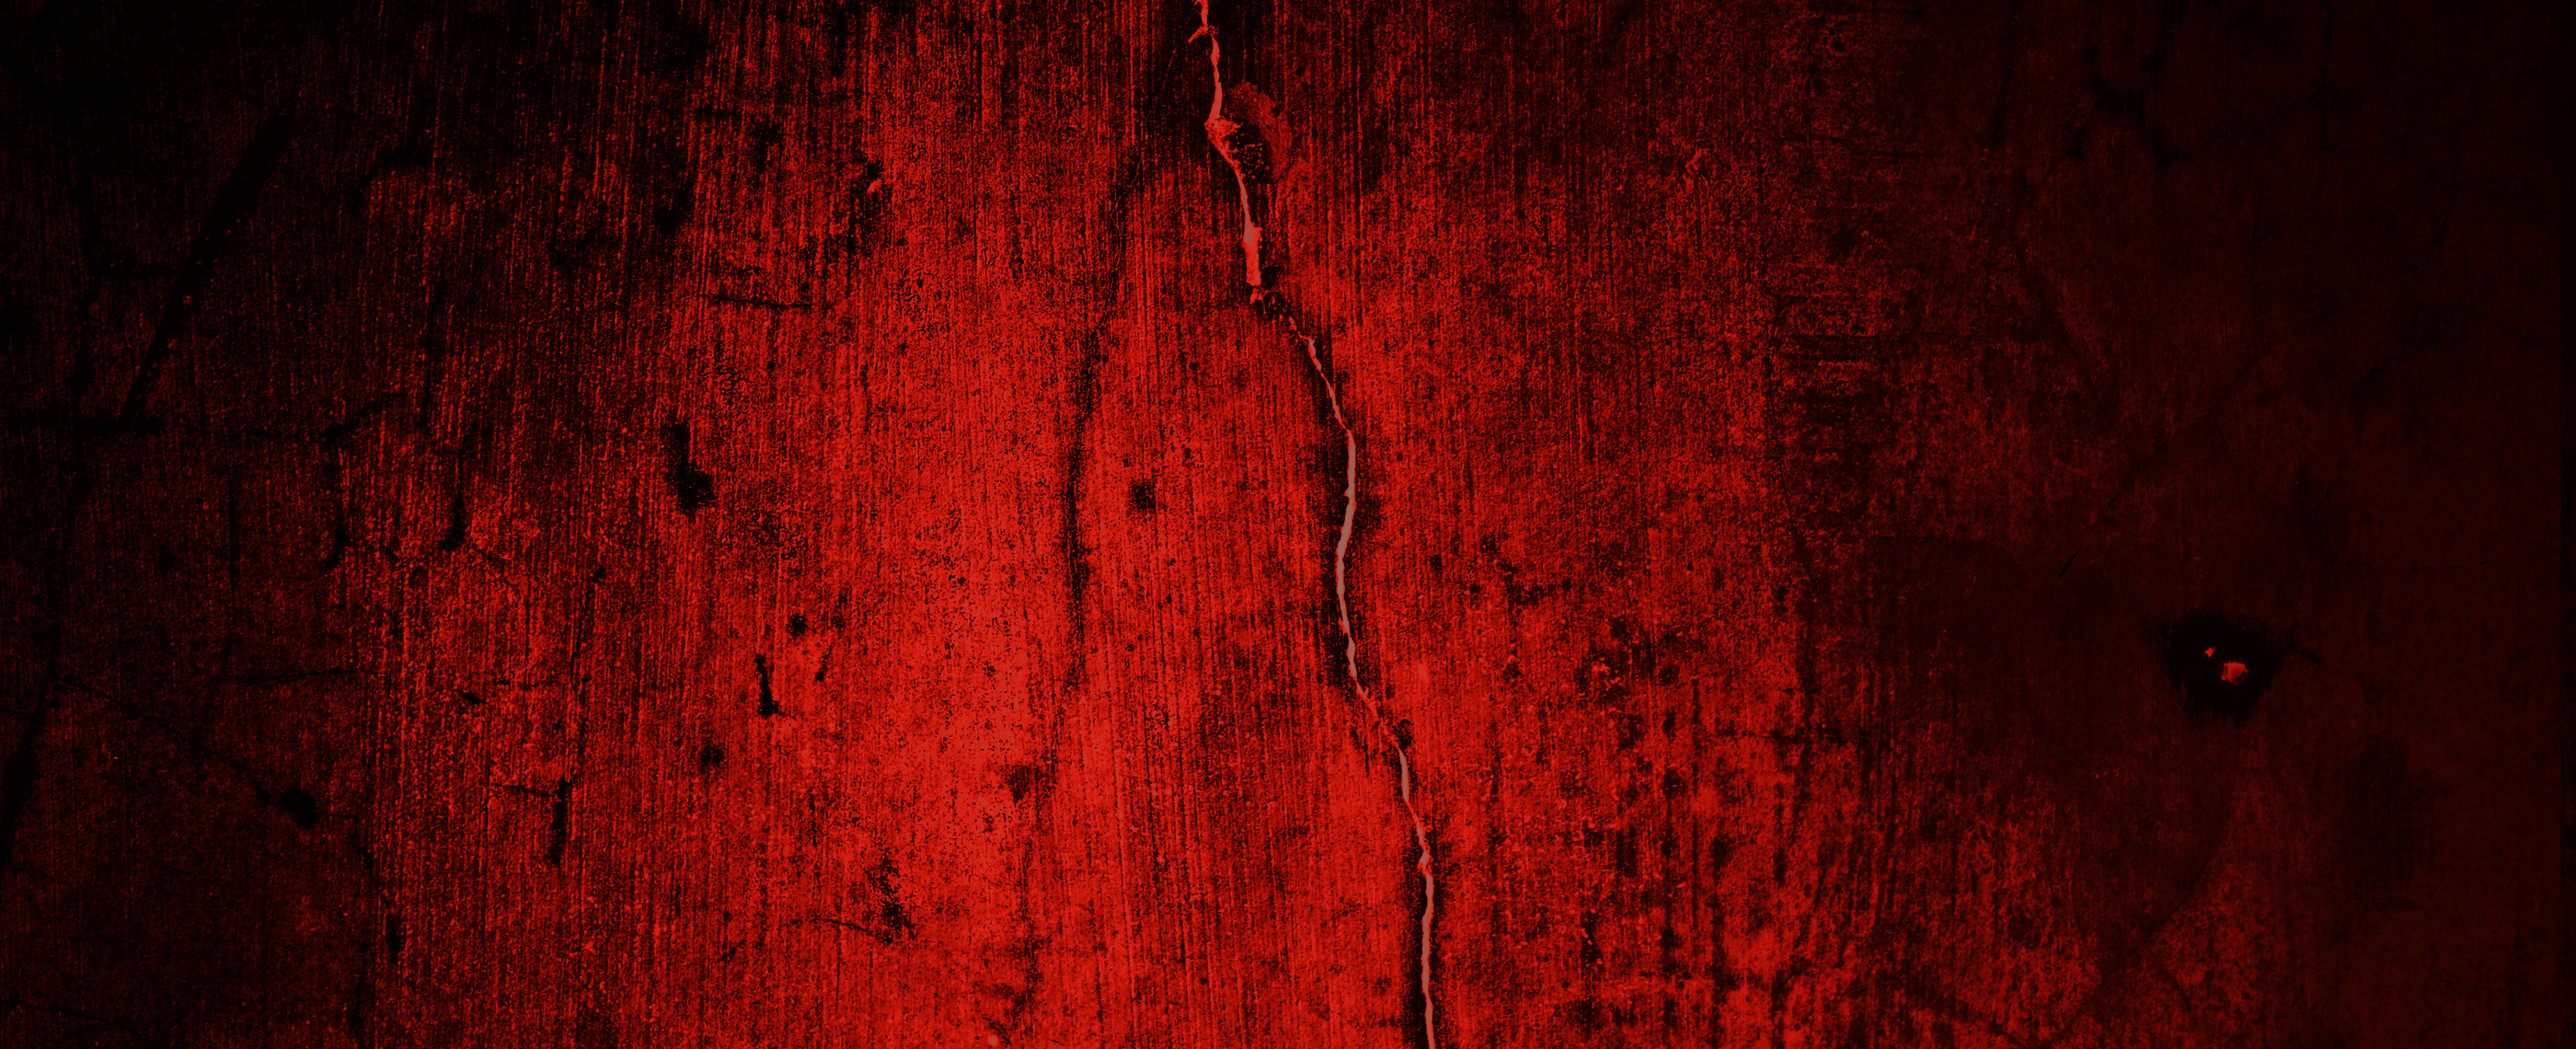 Red Grunge Horro Wall Texture